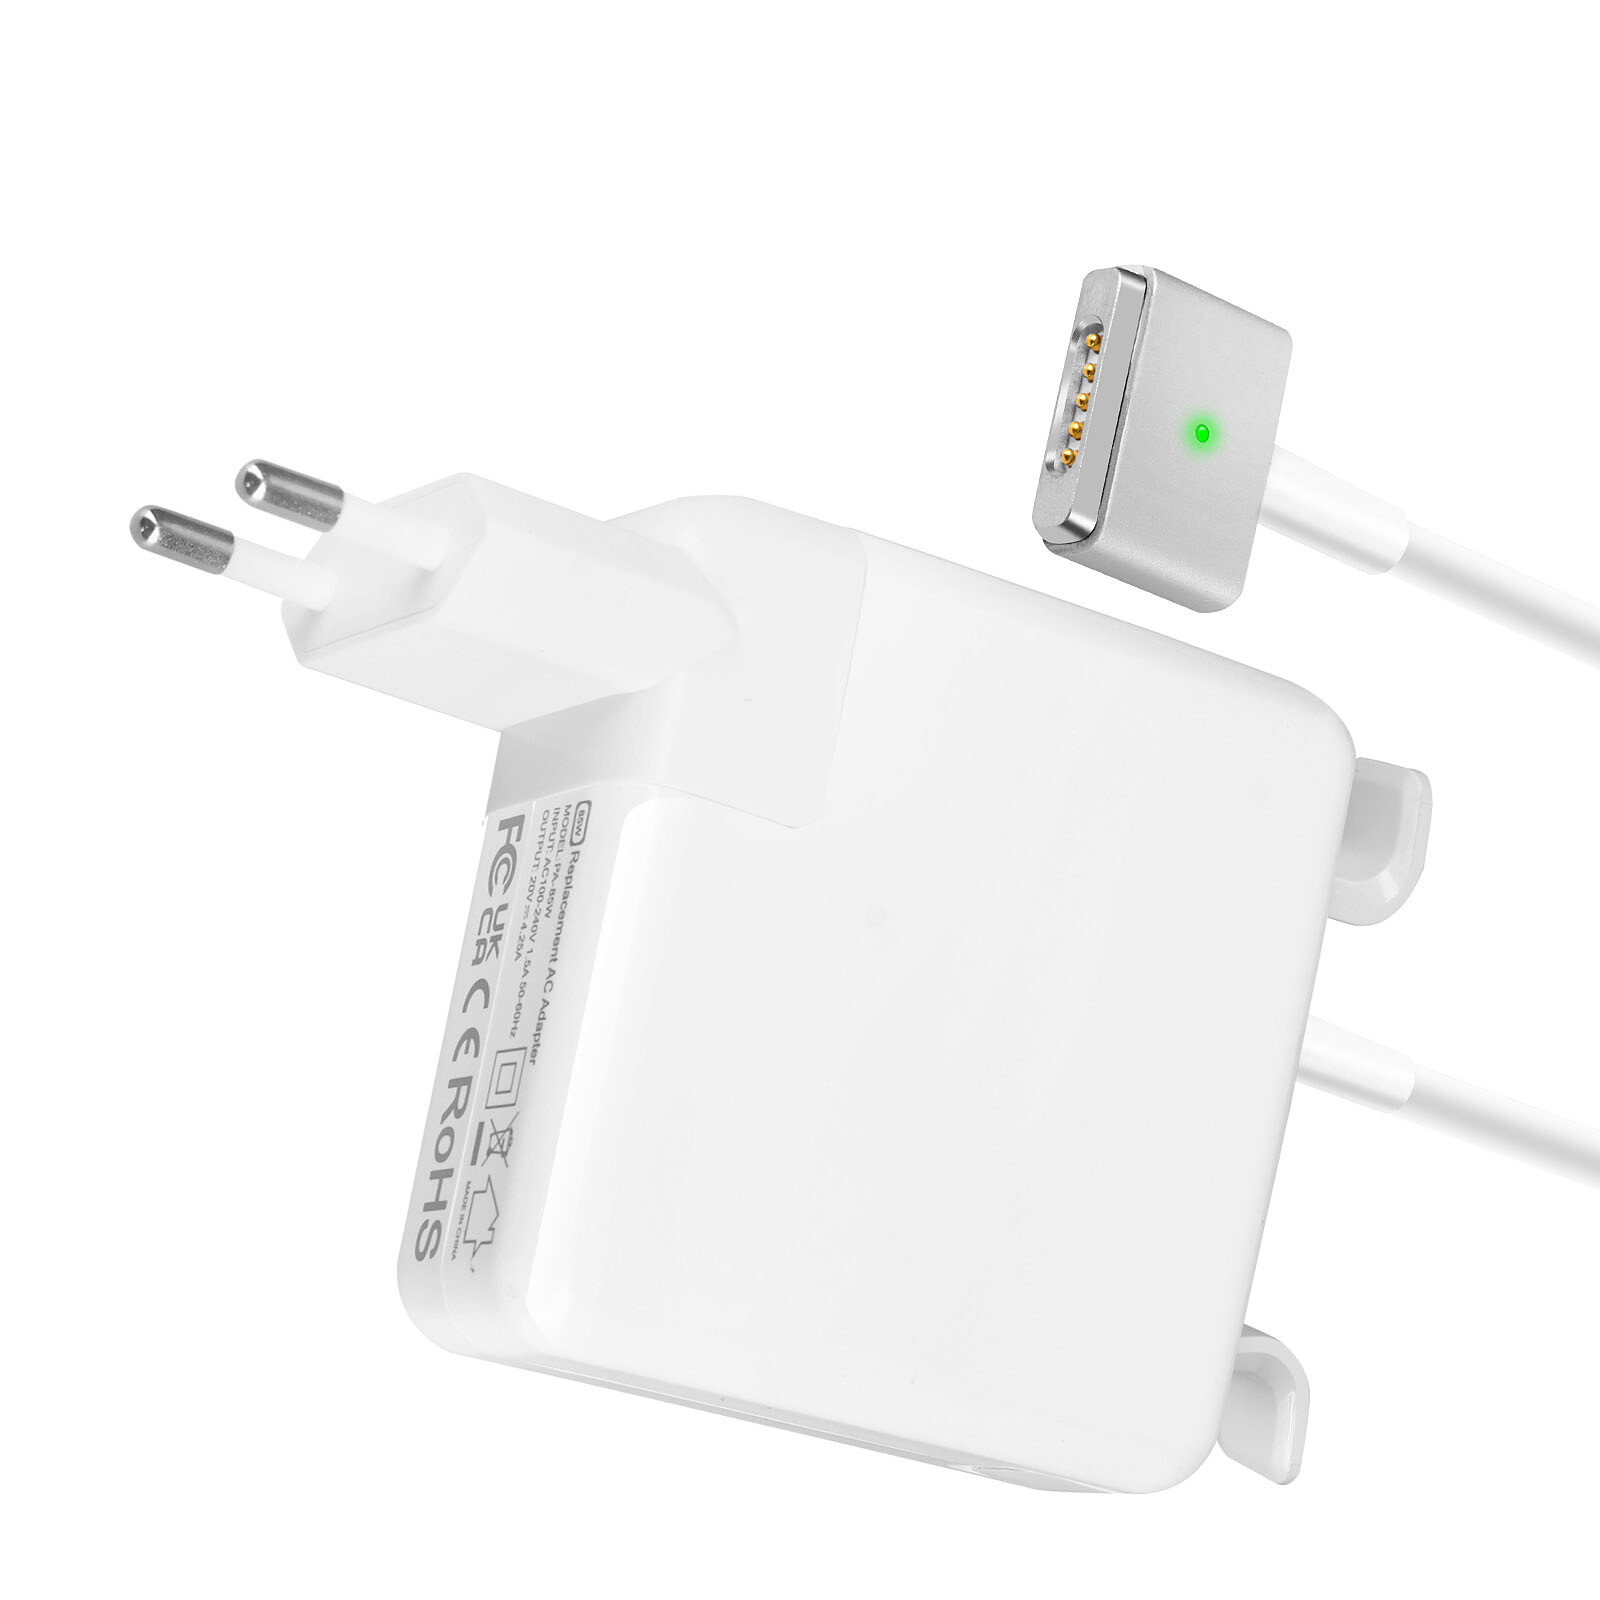 Avizar Chargeur Macbook Magsafe 2 Magnétique Charge Rapide 65W